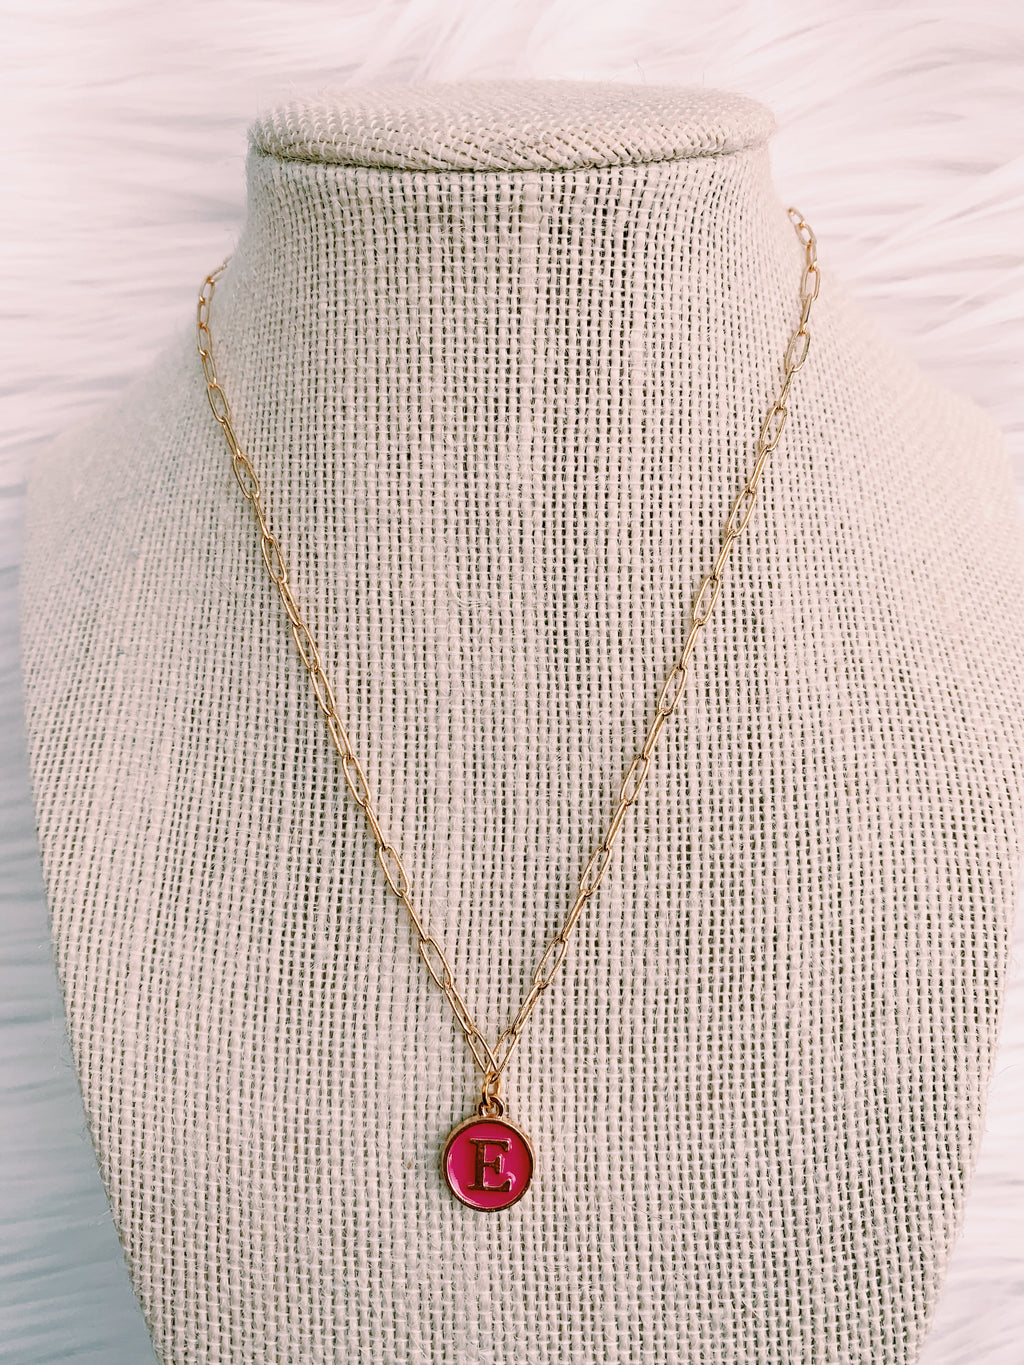 Hot Pink & Gold Initial Necklace